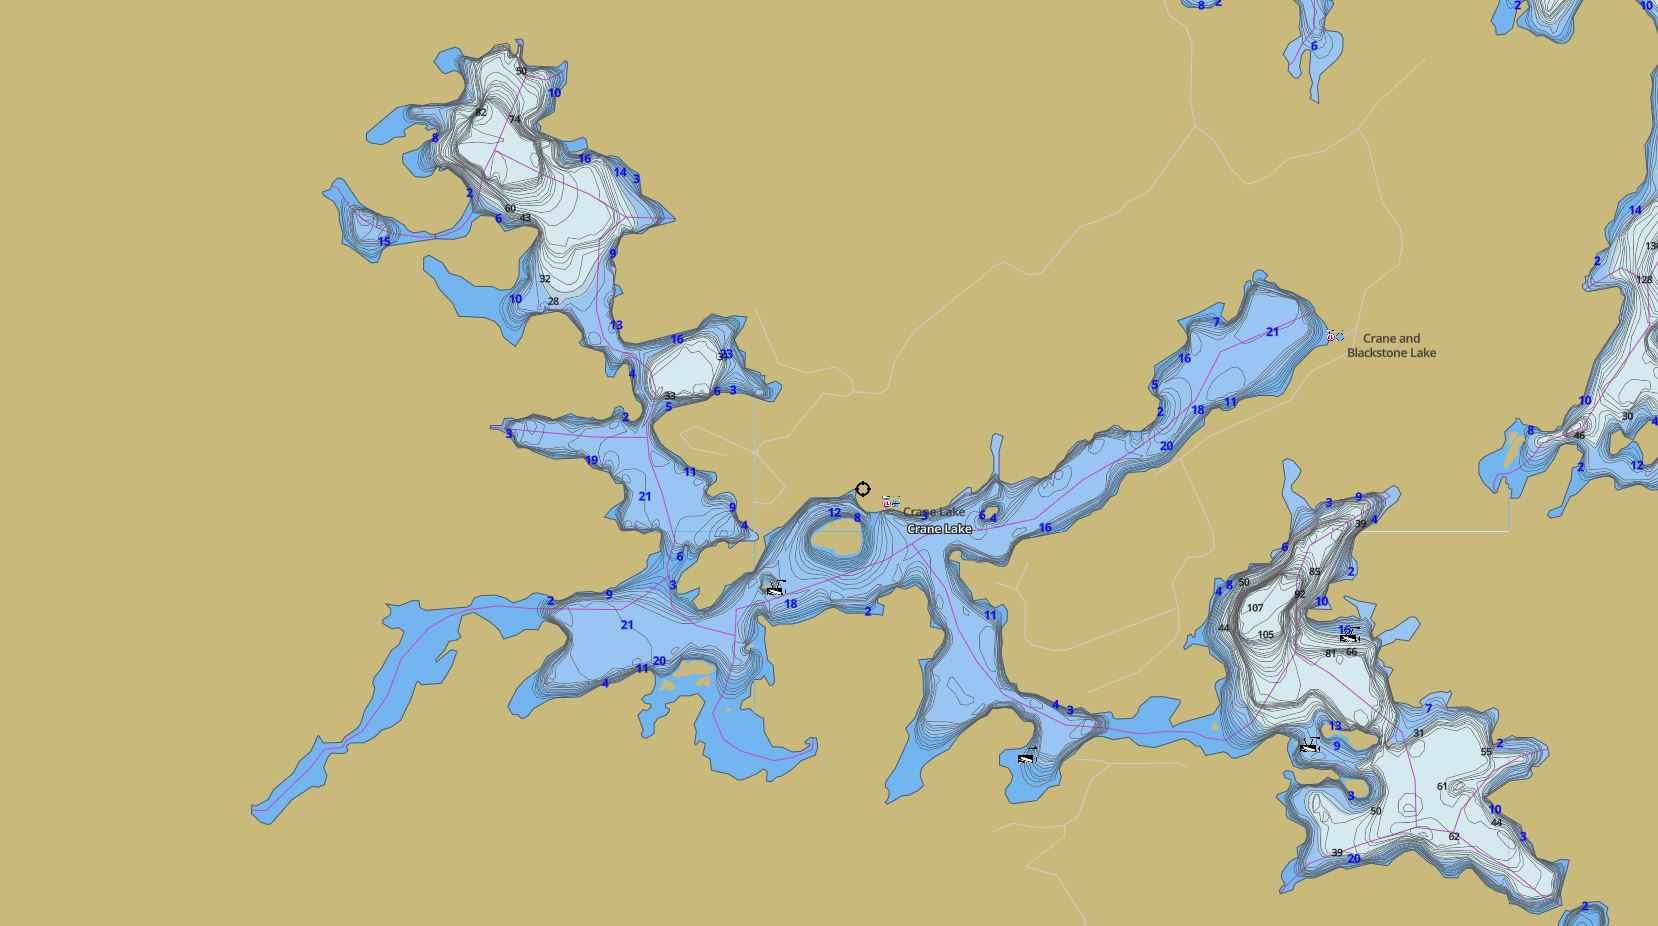 Contour Map of Crane Lake in Municipality of Archipelago and the District of Parry Sound